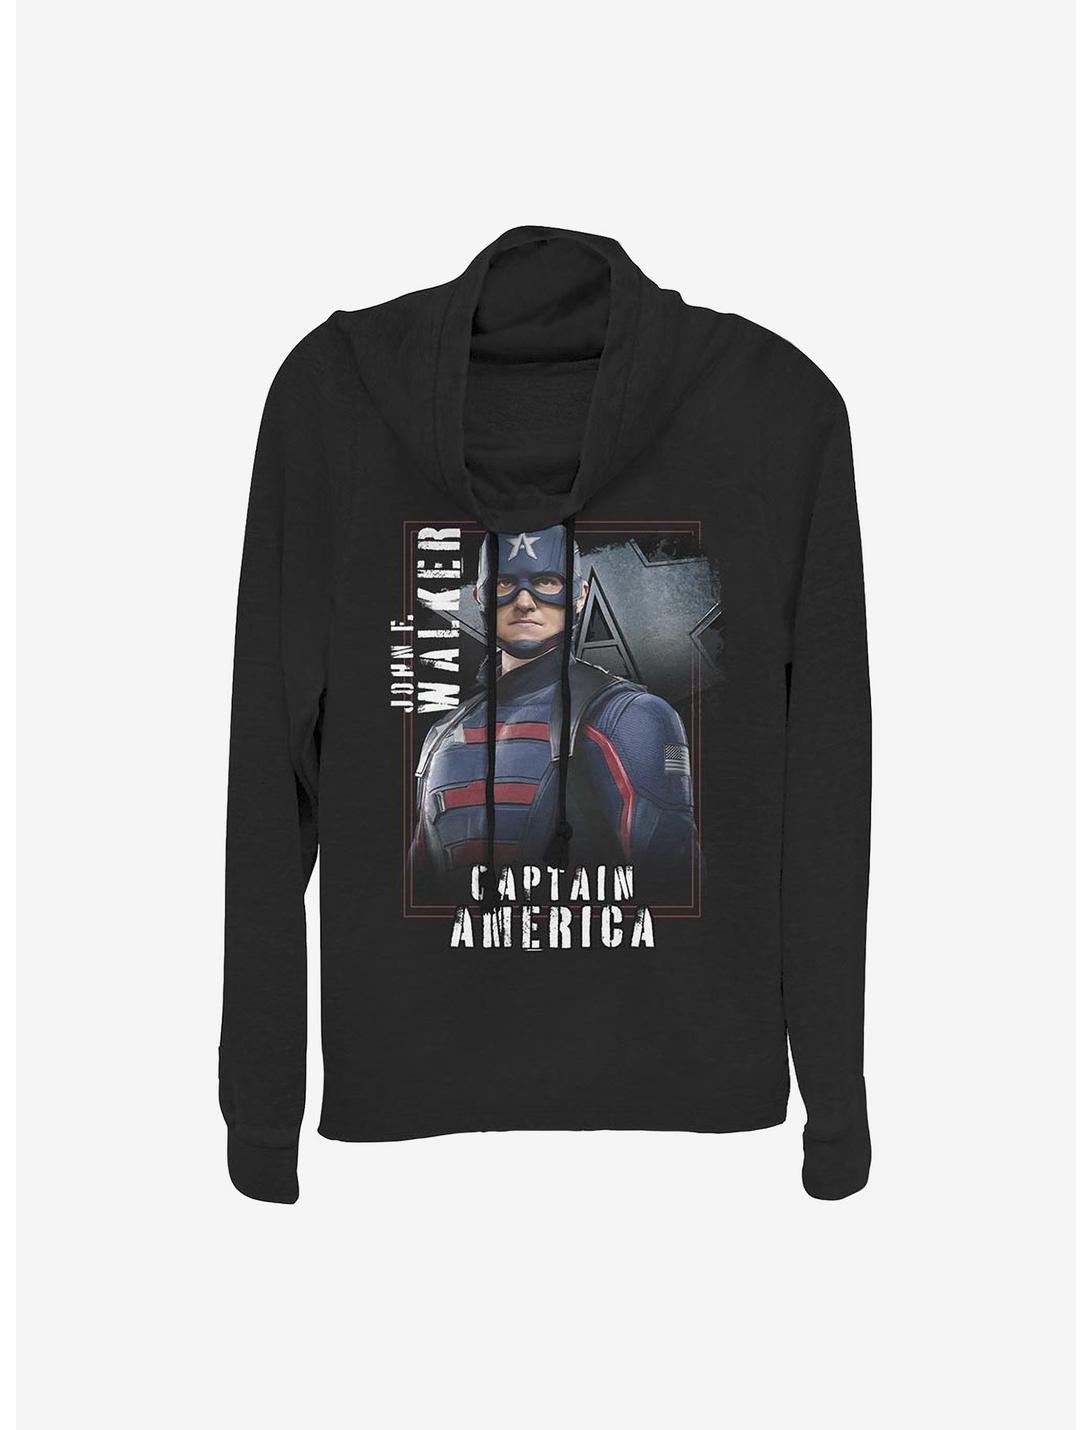 Marvel The Falcon And The Winter Soldier Captain America John F. Walker Cowlneck Long-Sleeve Girls Top, BLACK, hi-res